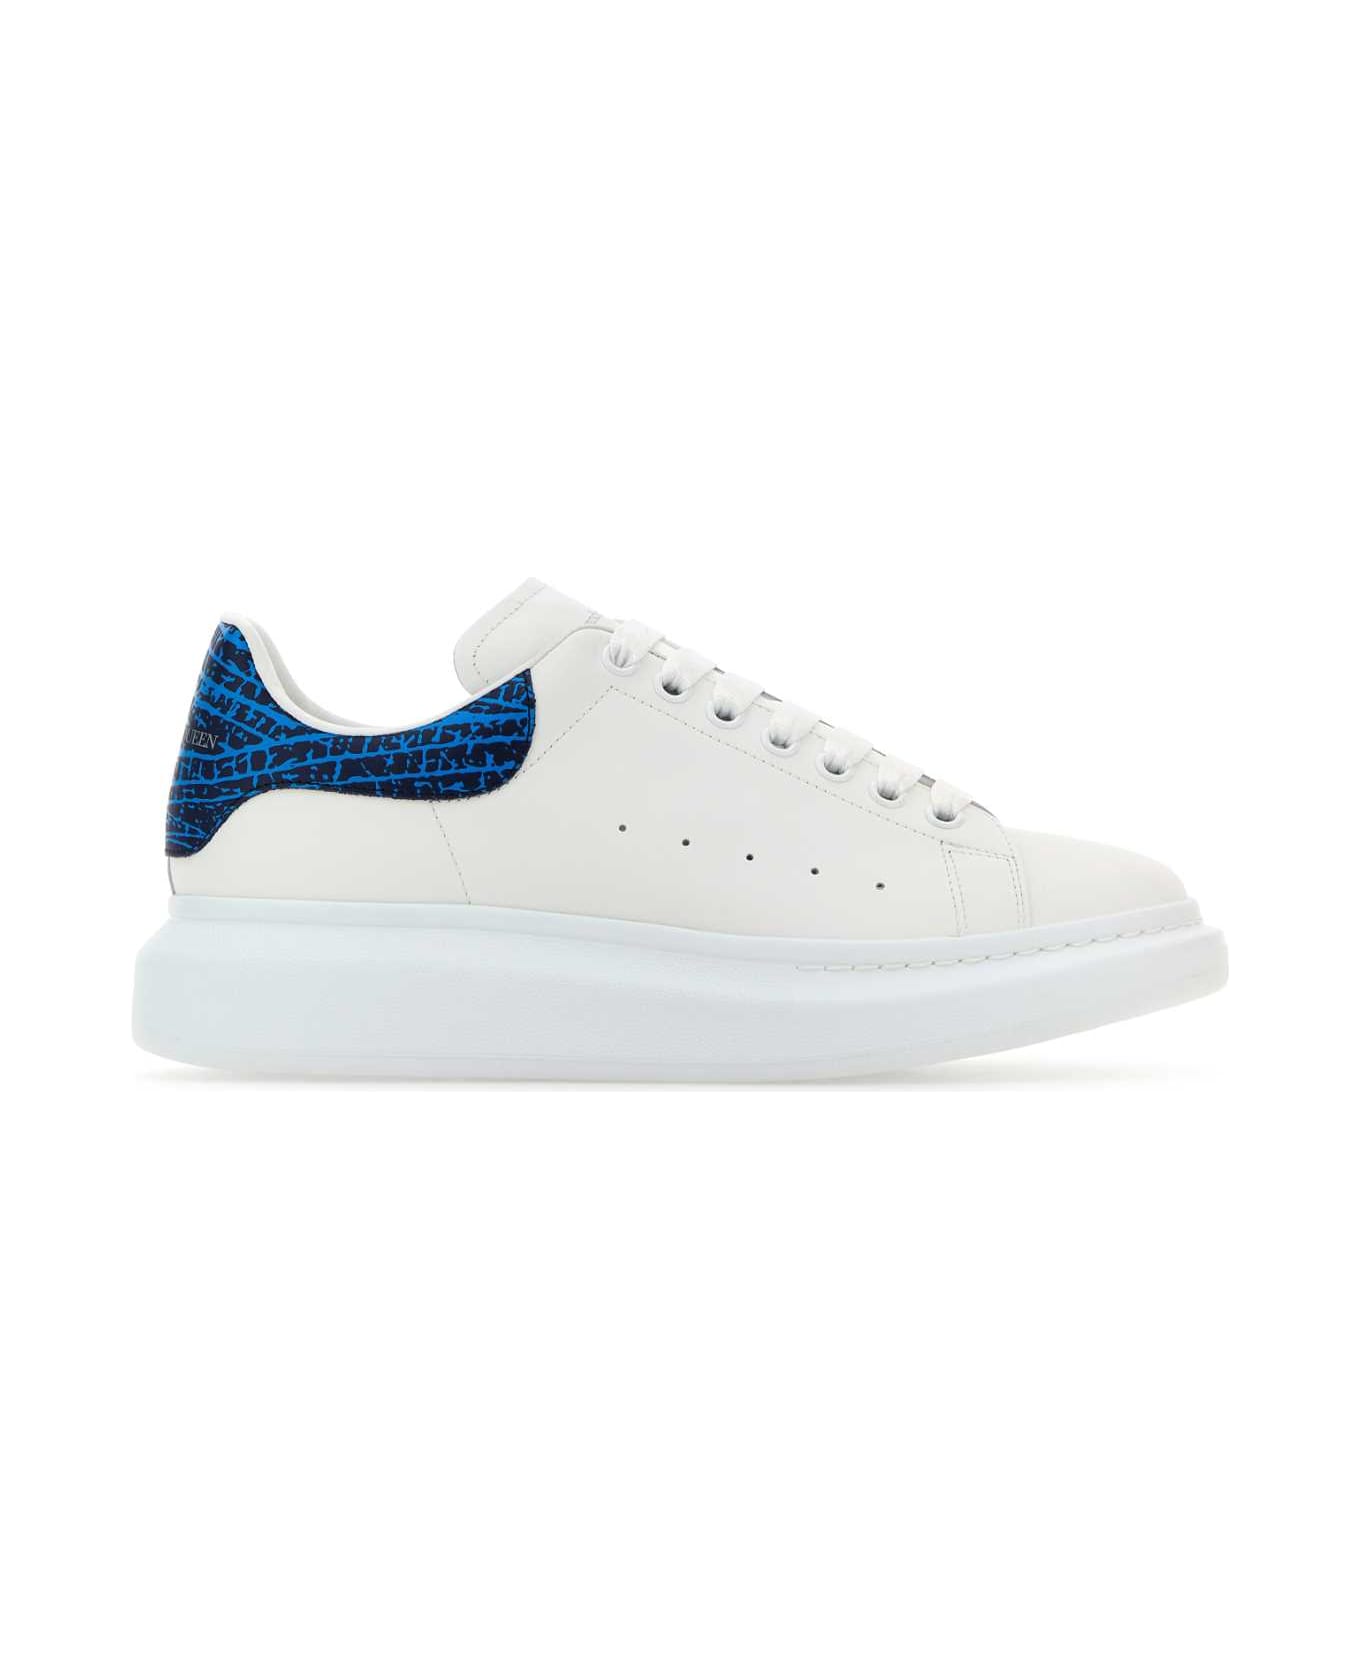 Alexander McQueen Sneakers With Printed Leather Heel - WHITELAPISBLUE